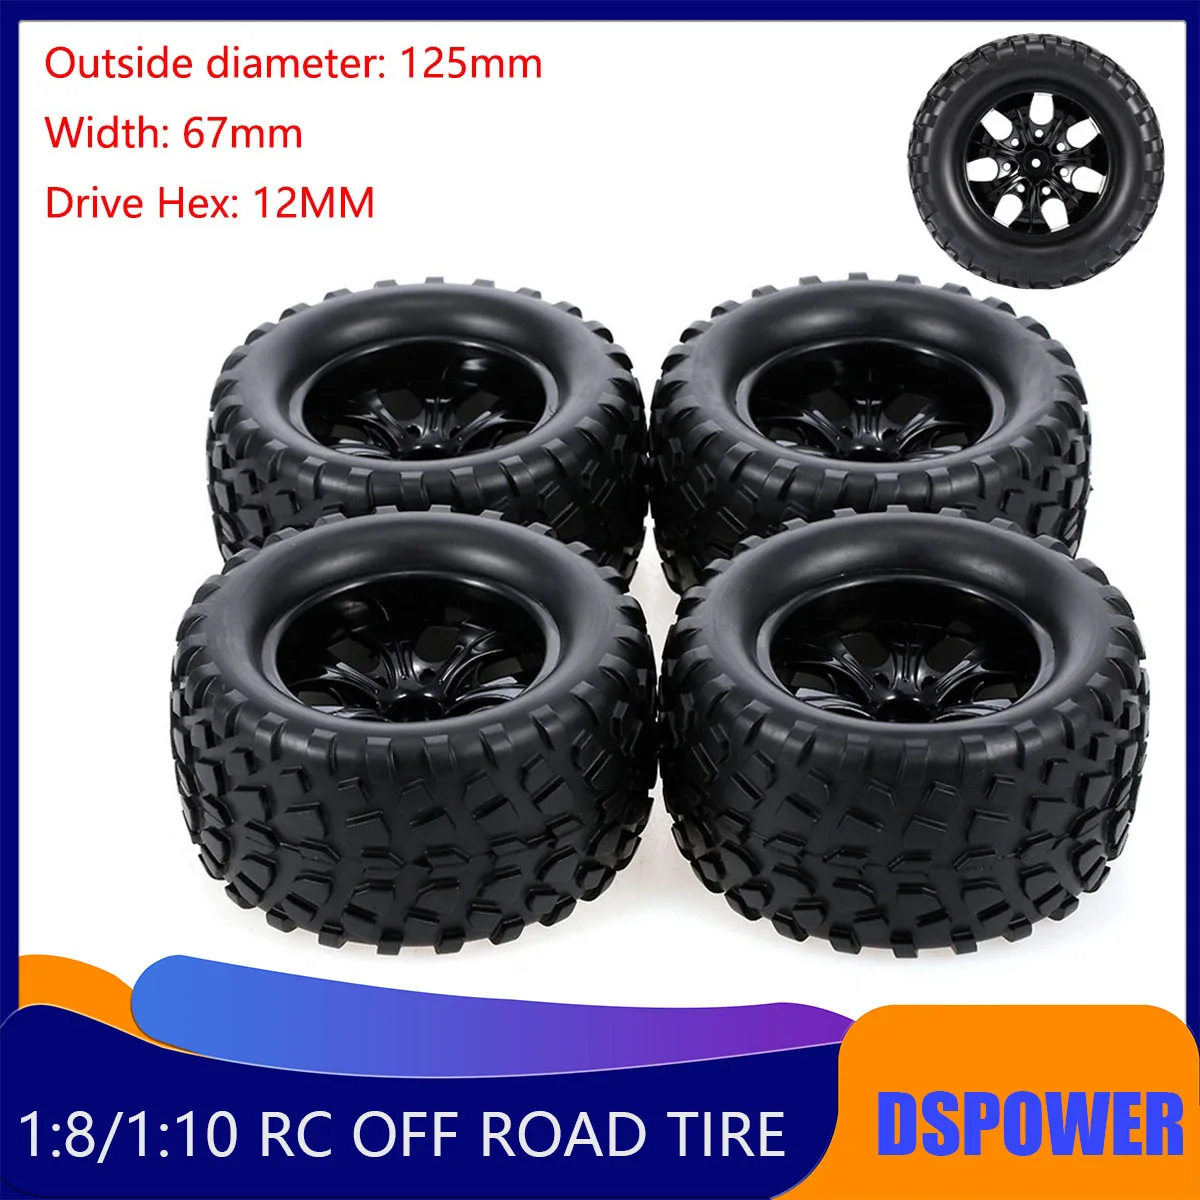 

1/10 4PCS Tyre Wheel 120mm 125mm Monster Truck Tires Wheels Buggy for RC Car Crawler Traxxas Scx10 REDCAT HPI HSP